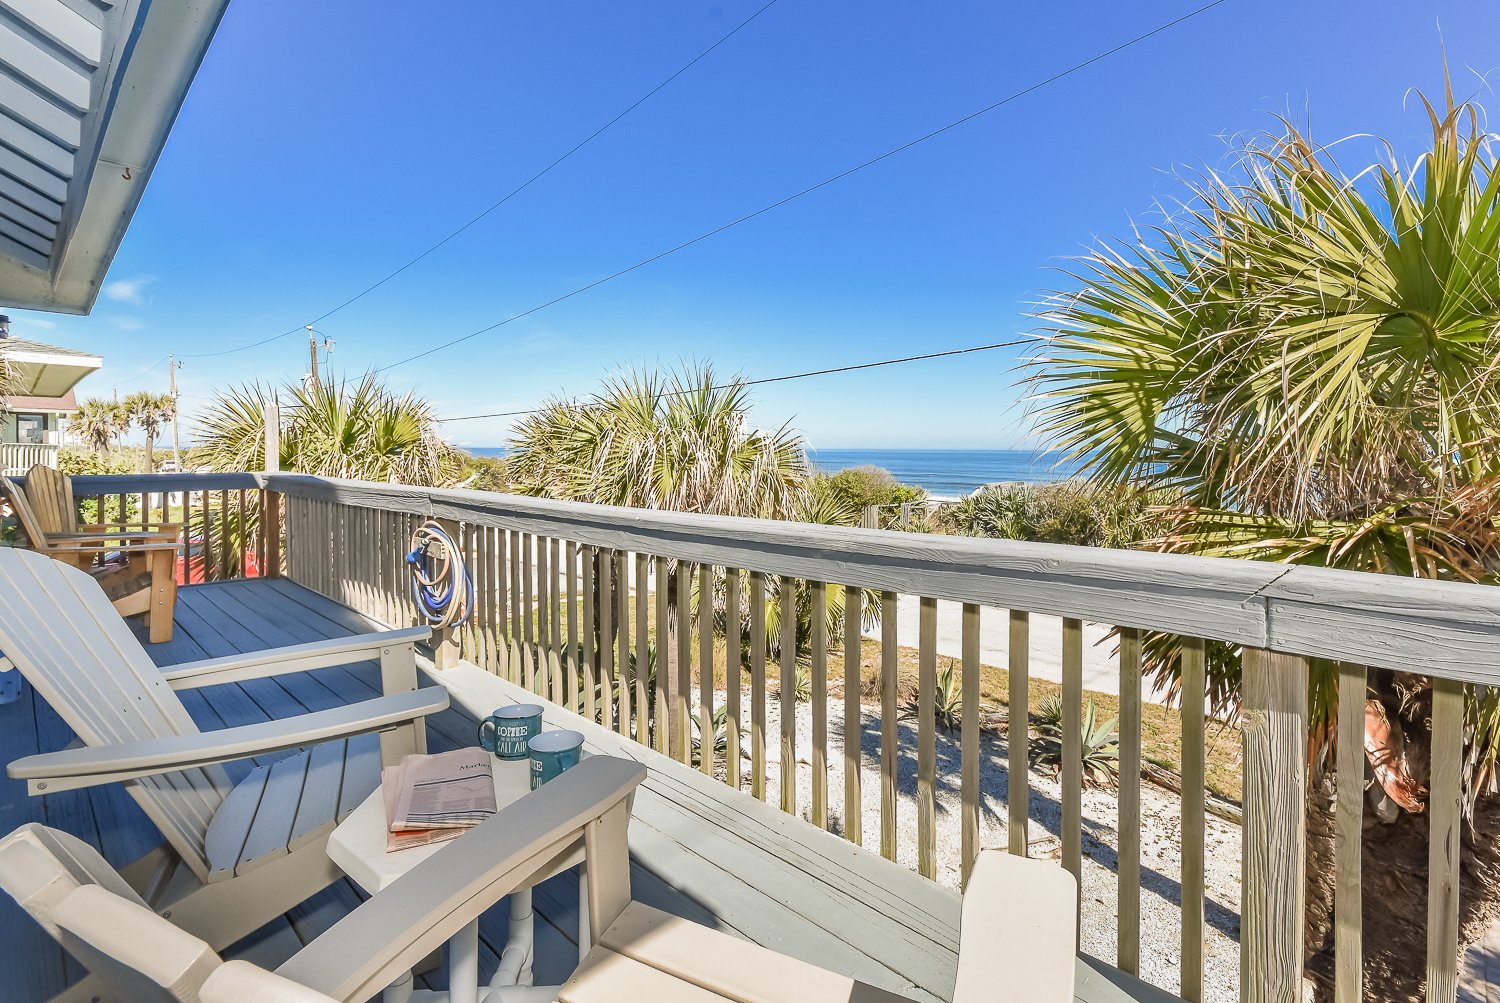 Relax on the ocean front deck and take in the gorgeous view.